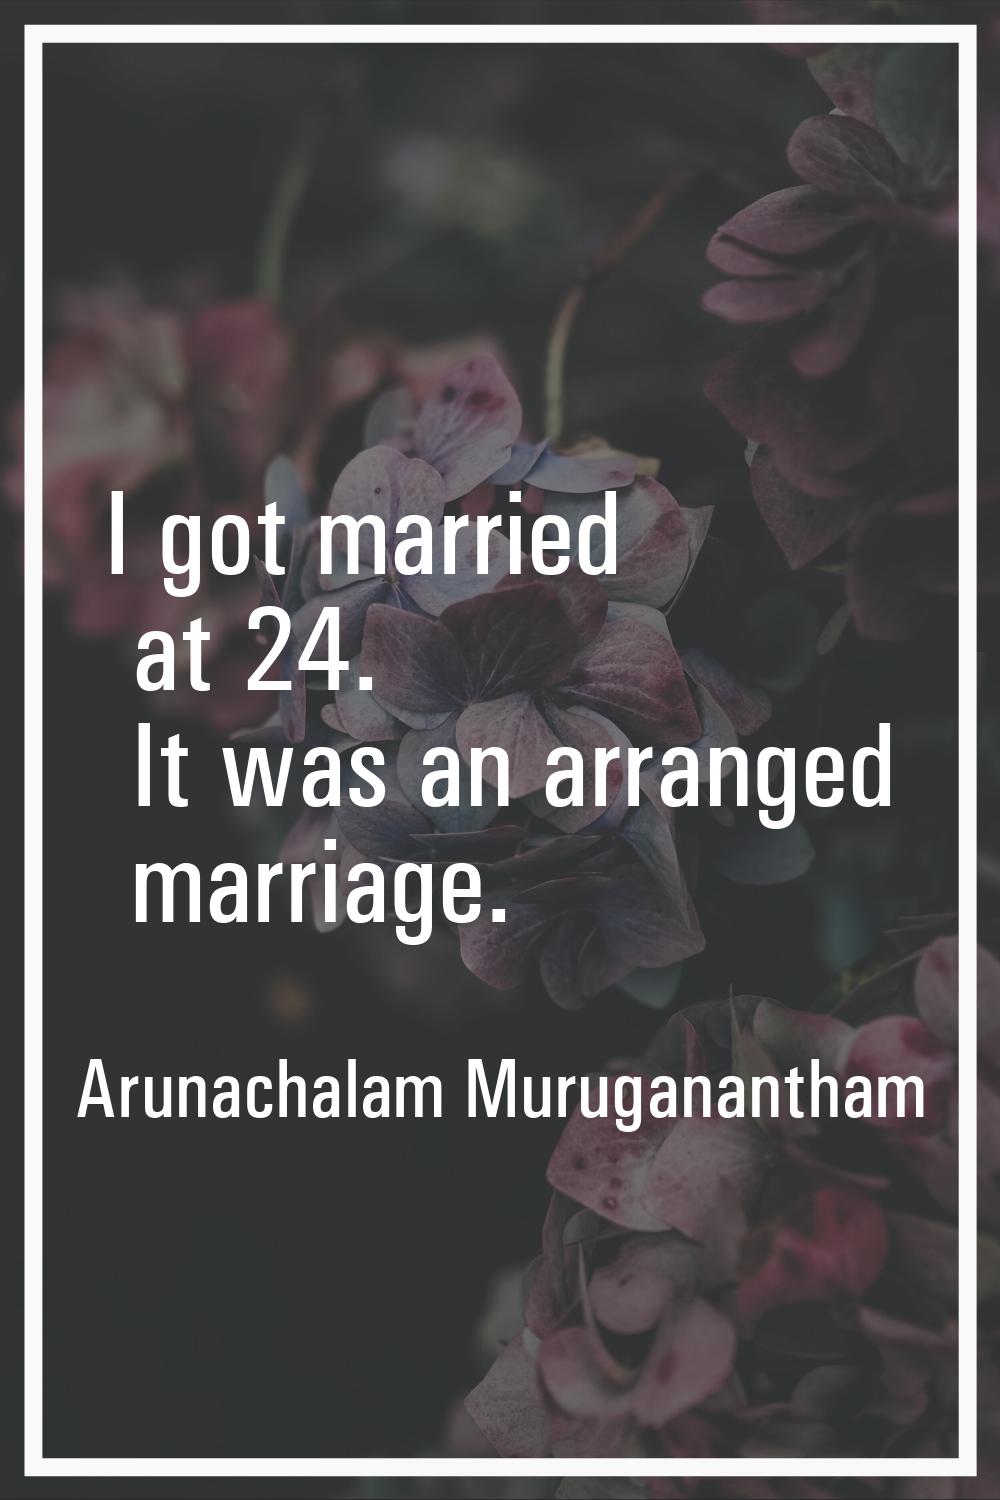 I got married at 24. It was an arranged marriage.